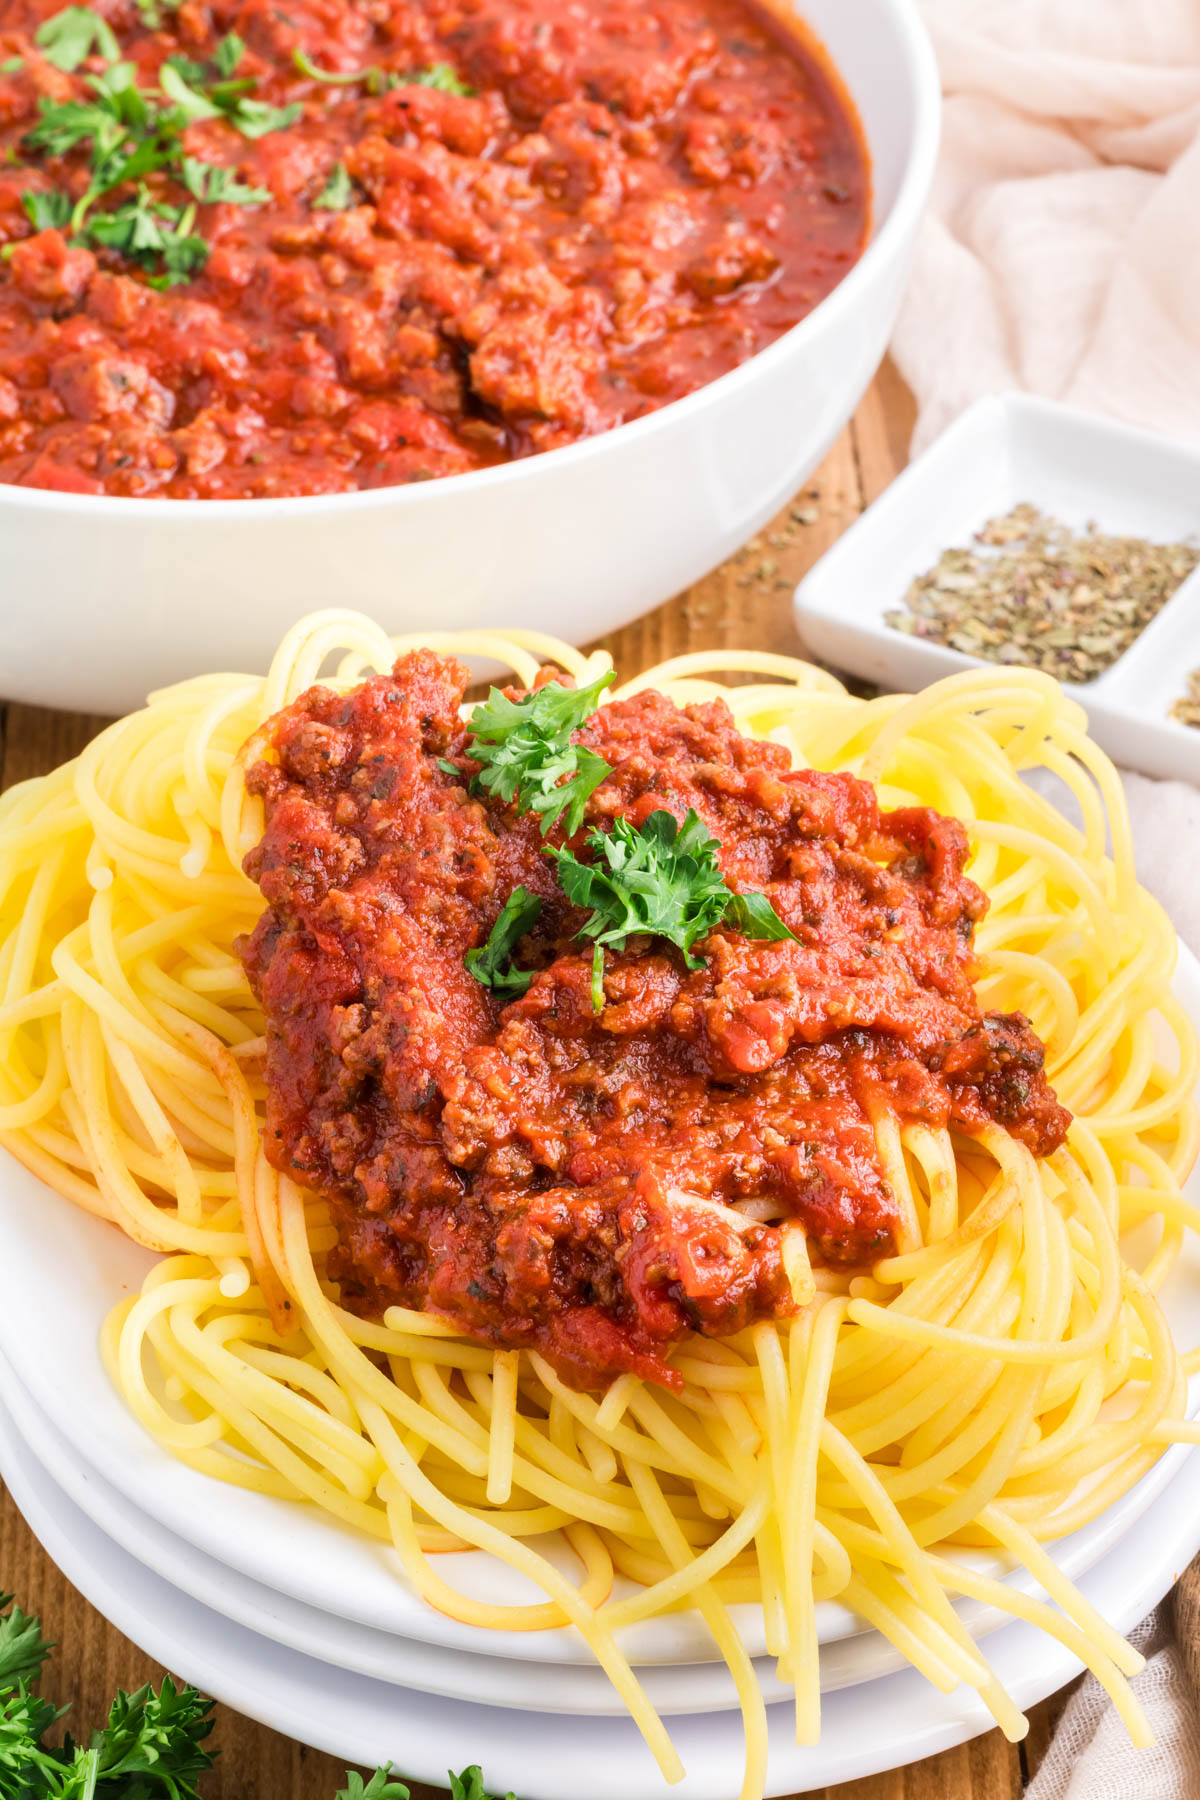 An image of a plate of spaghetti with meat sauce in front of a pan of meat sauce.